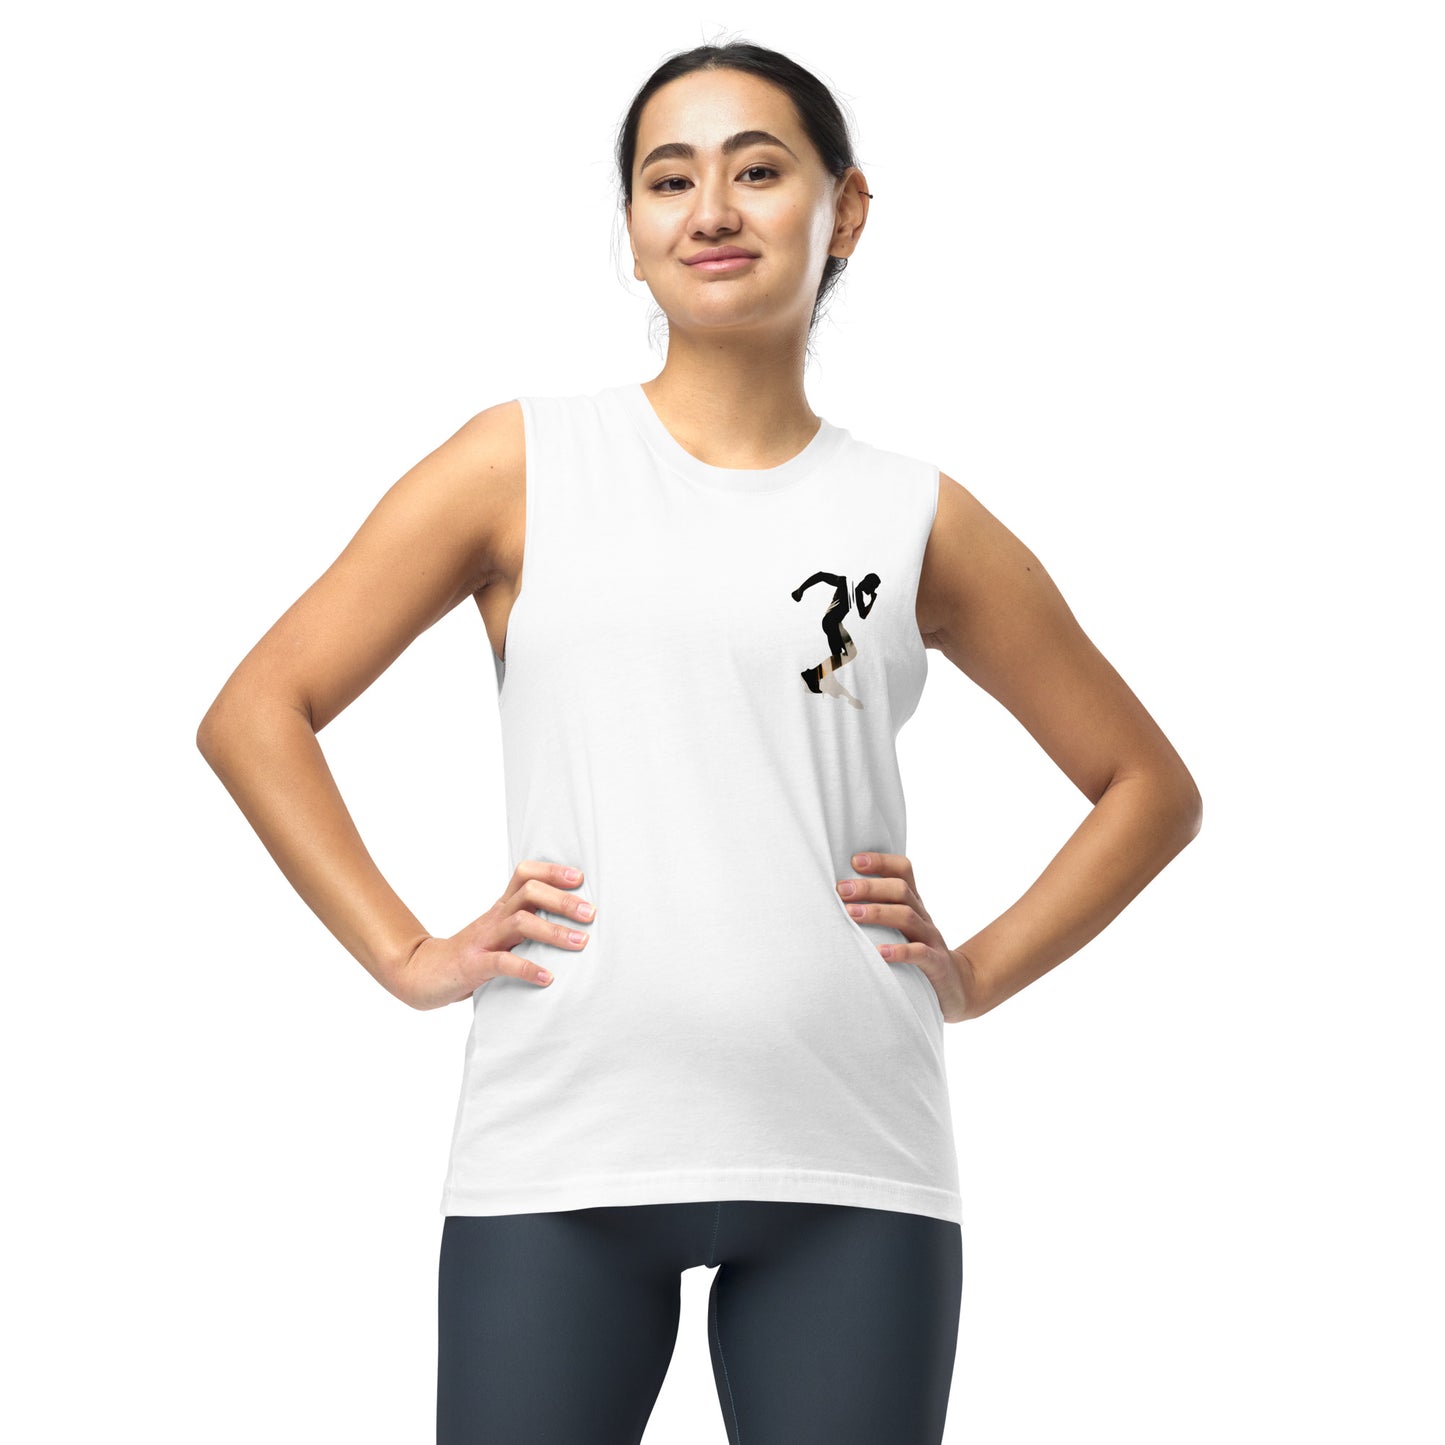 Xcel Xplode Xceed: Unisex GenX Graphic Muscle Shirt